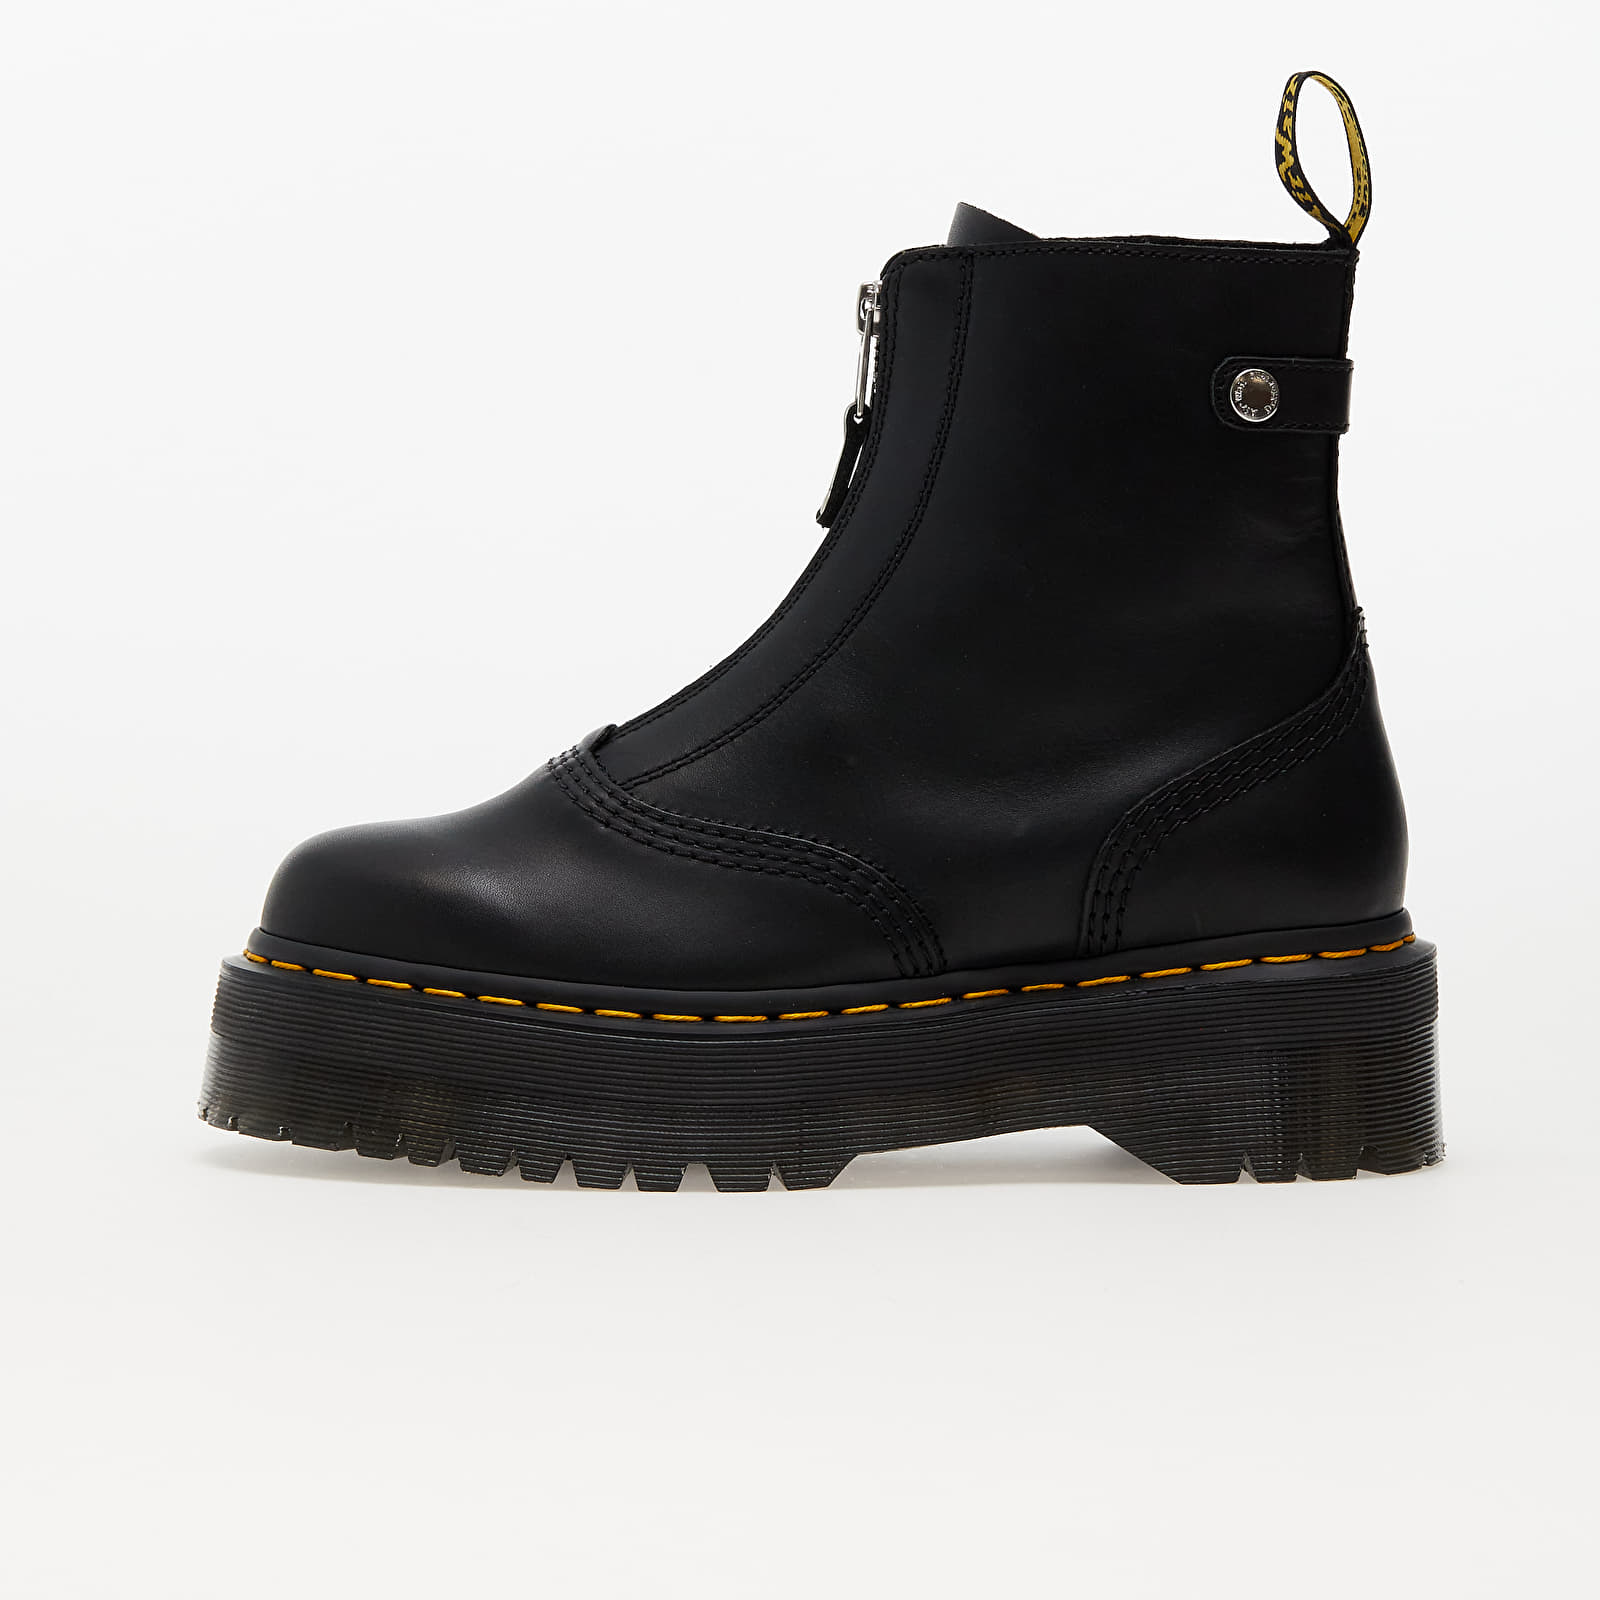 Women's sneakers and shoes Dr. Martens Jetta Zip Boot Black